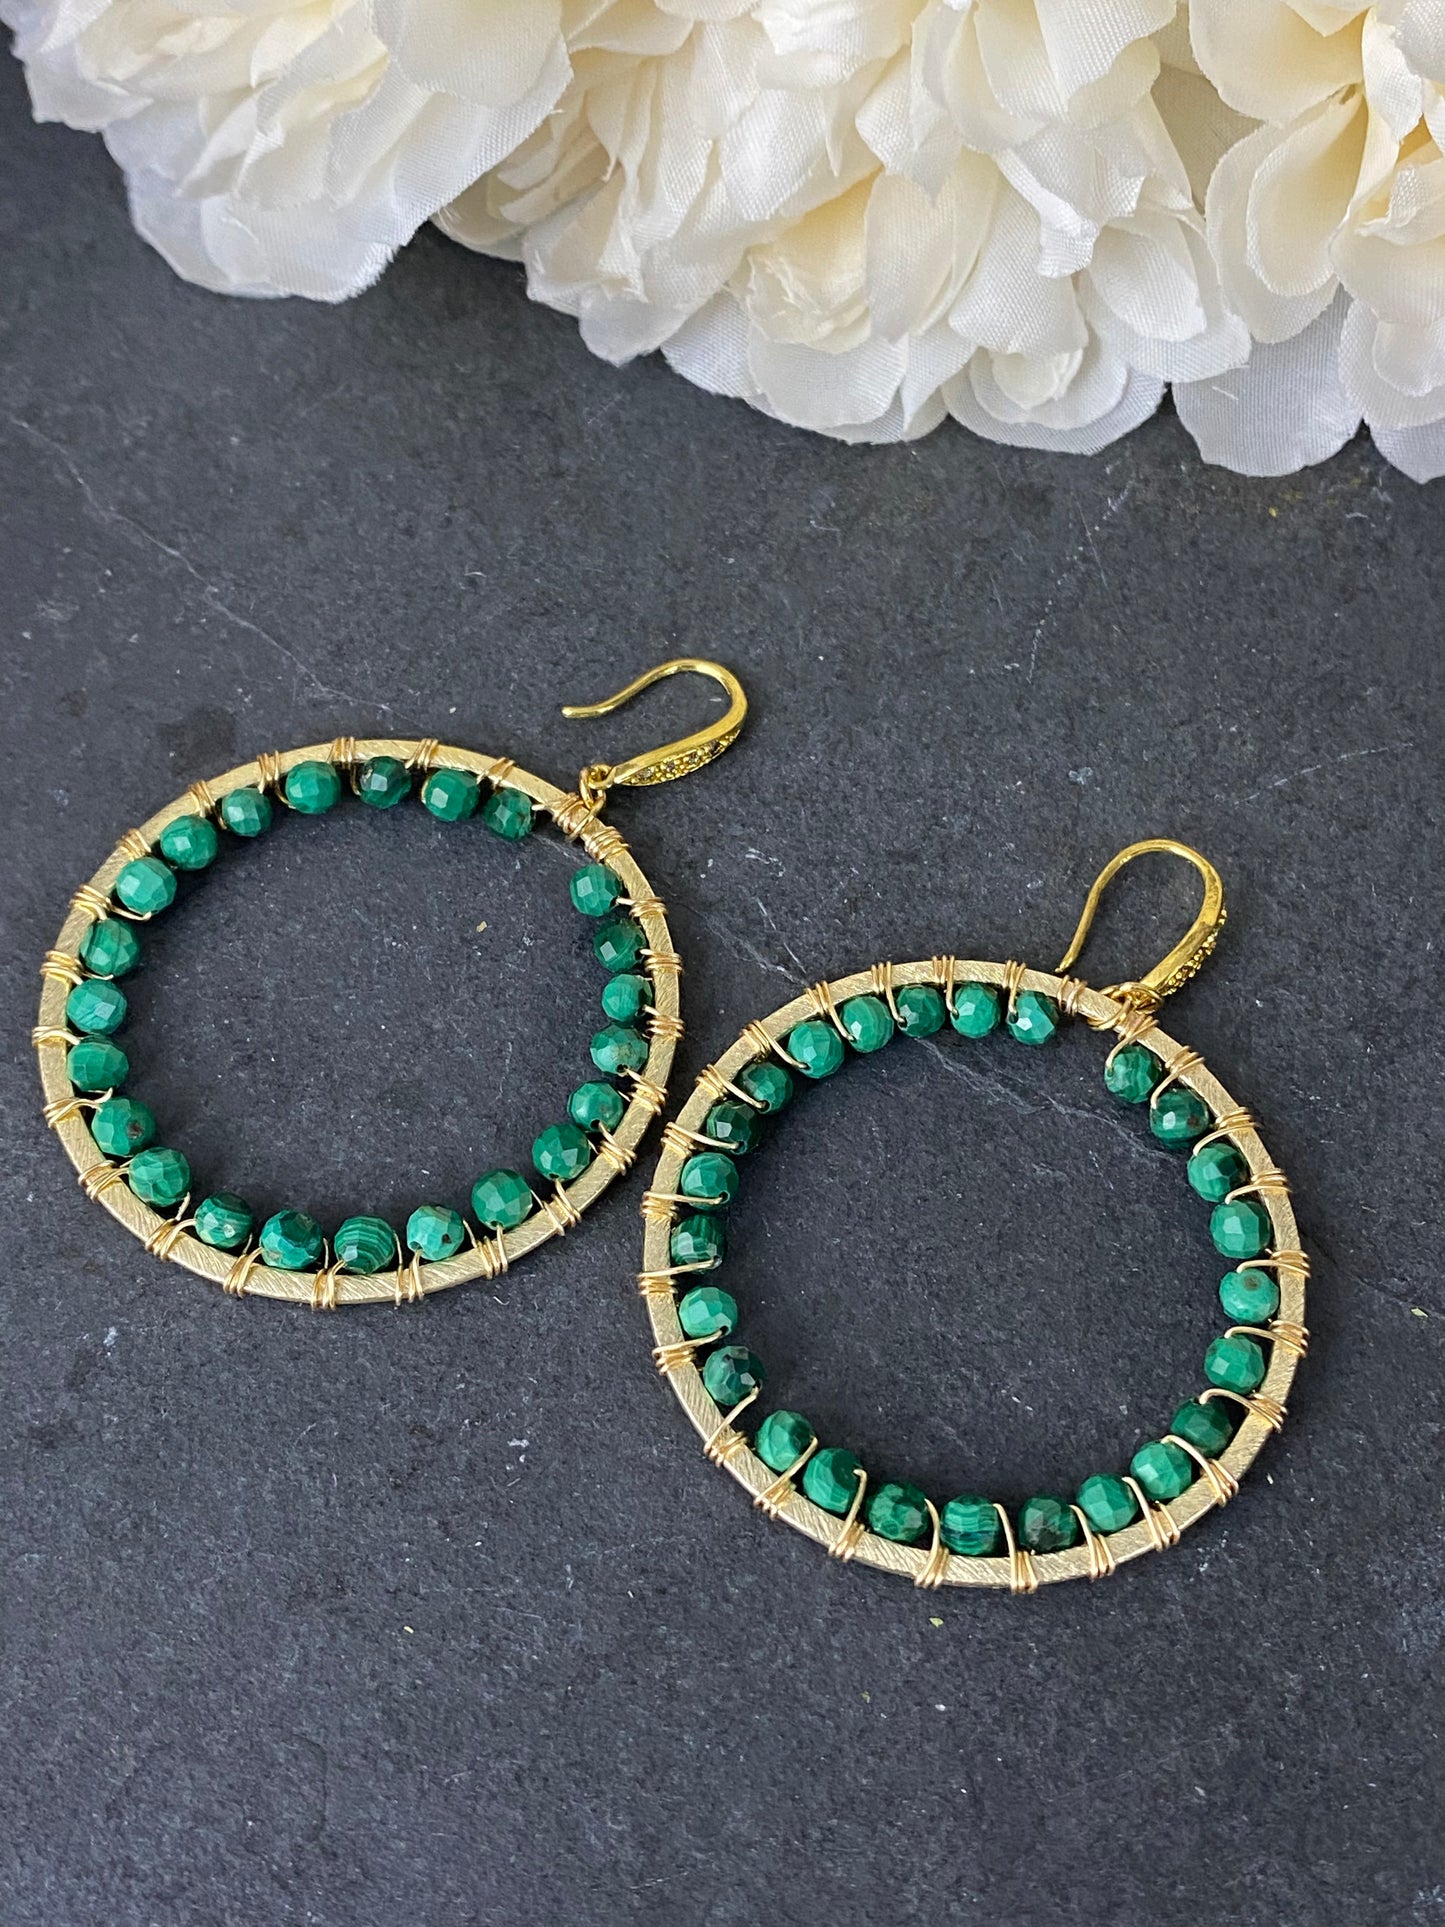 Gold hoops with genuine green malachite stone, earrings, jewelry - Andria Bieber Designs 